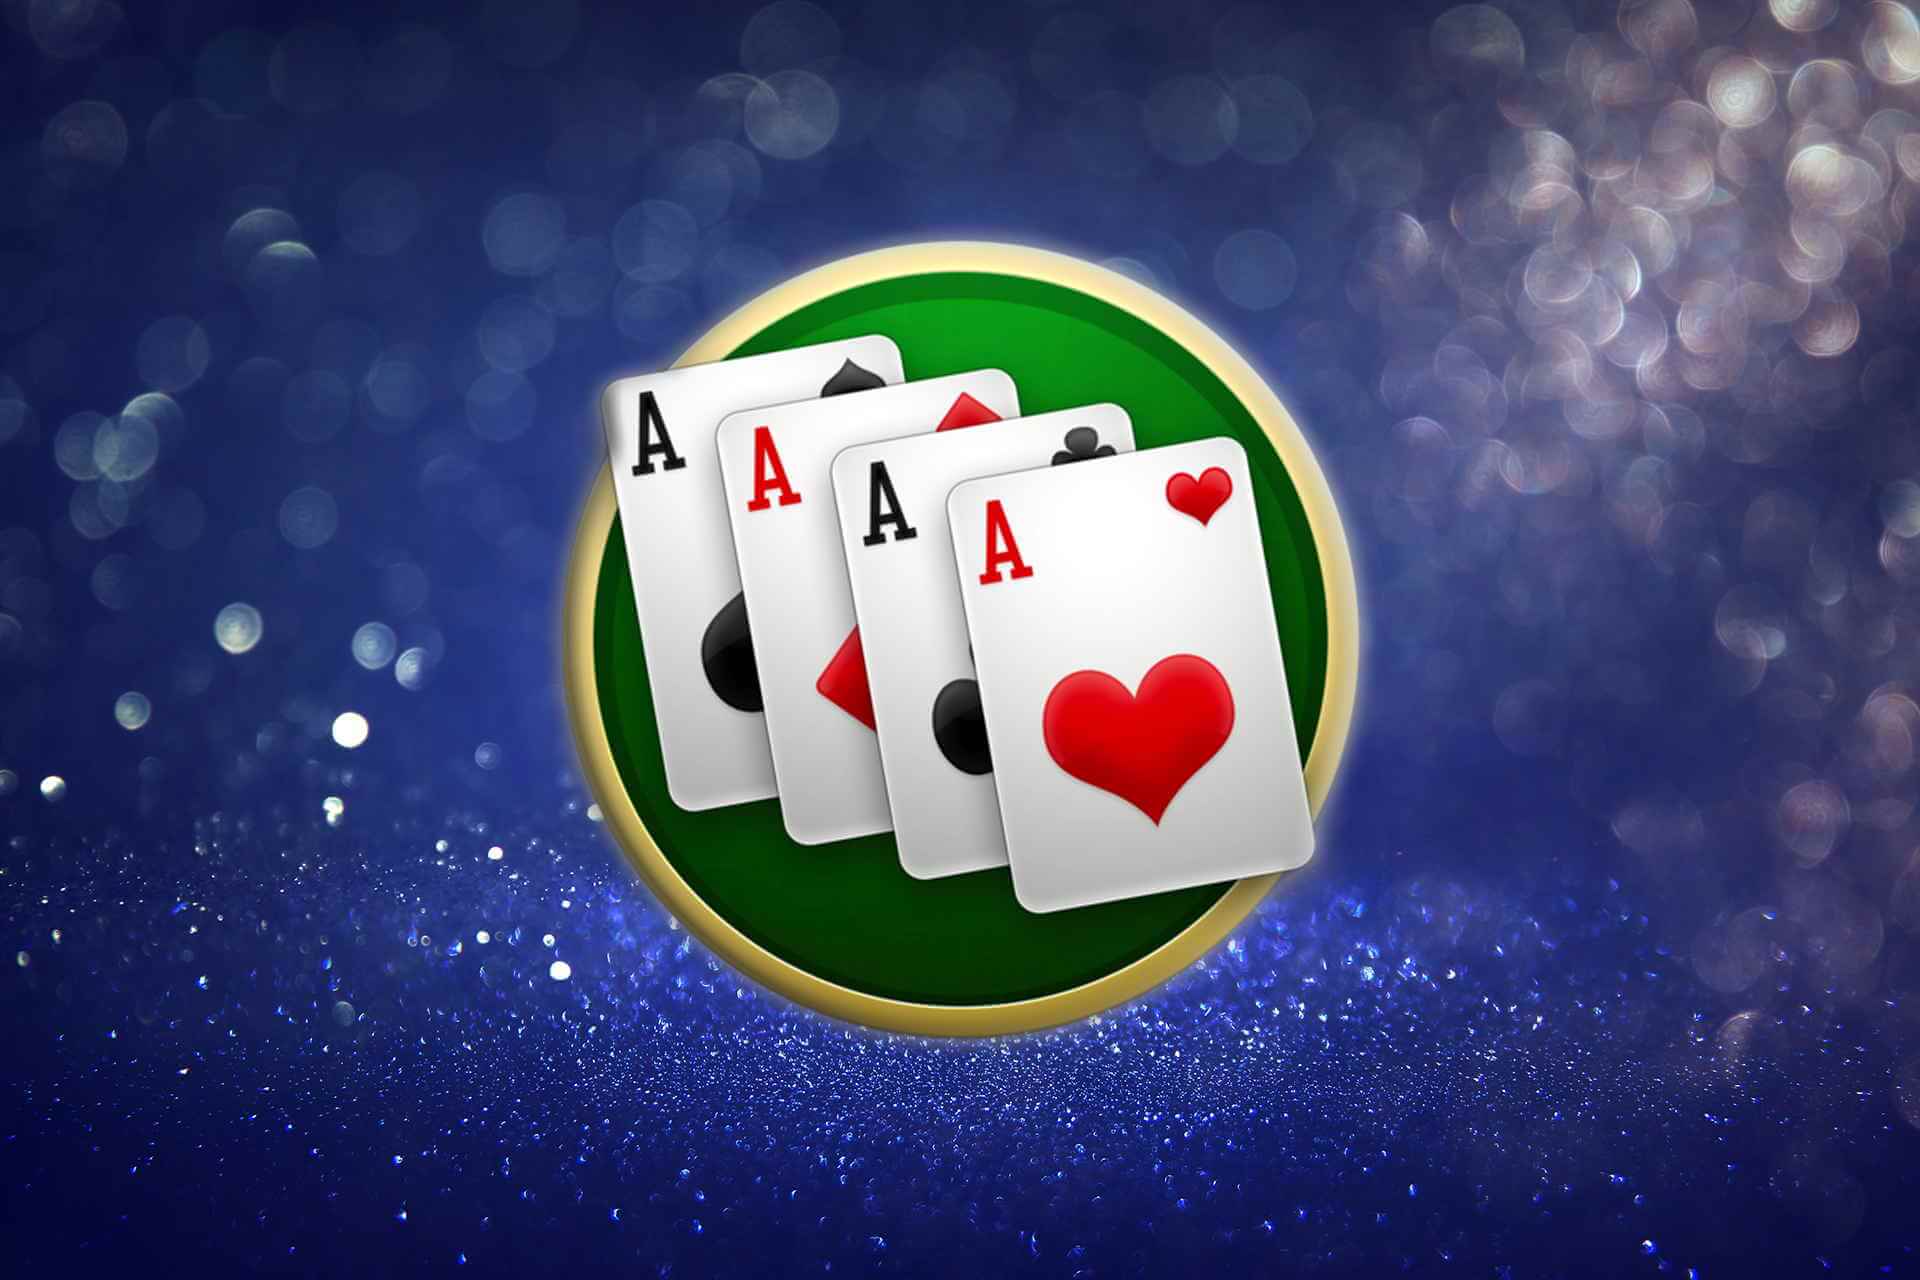 microsoft solitaire collection will not load